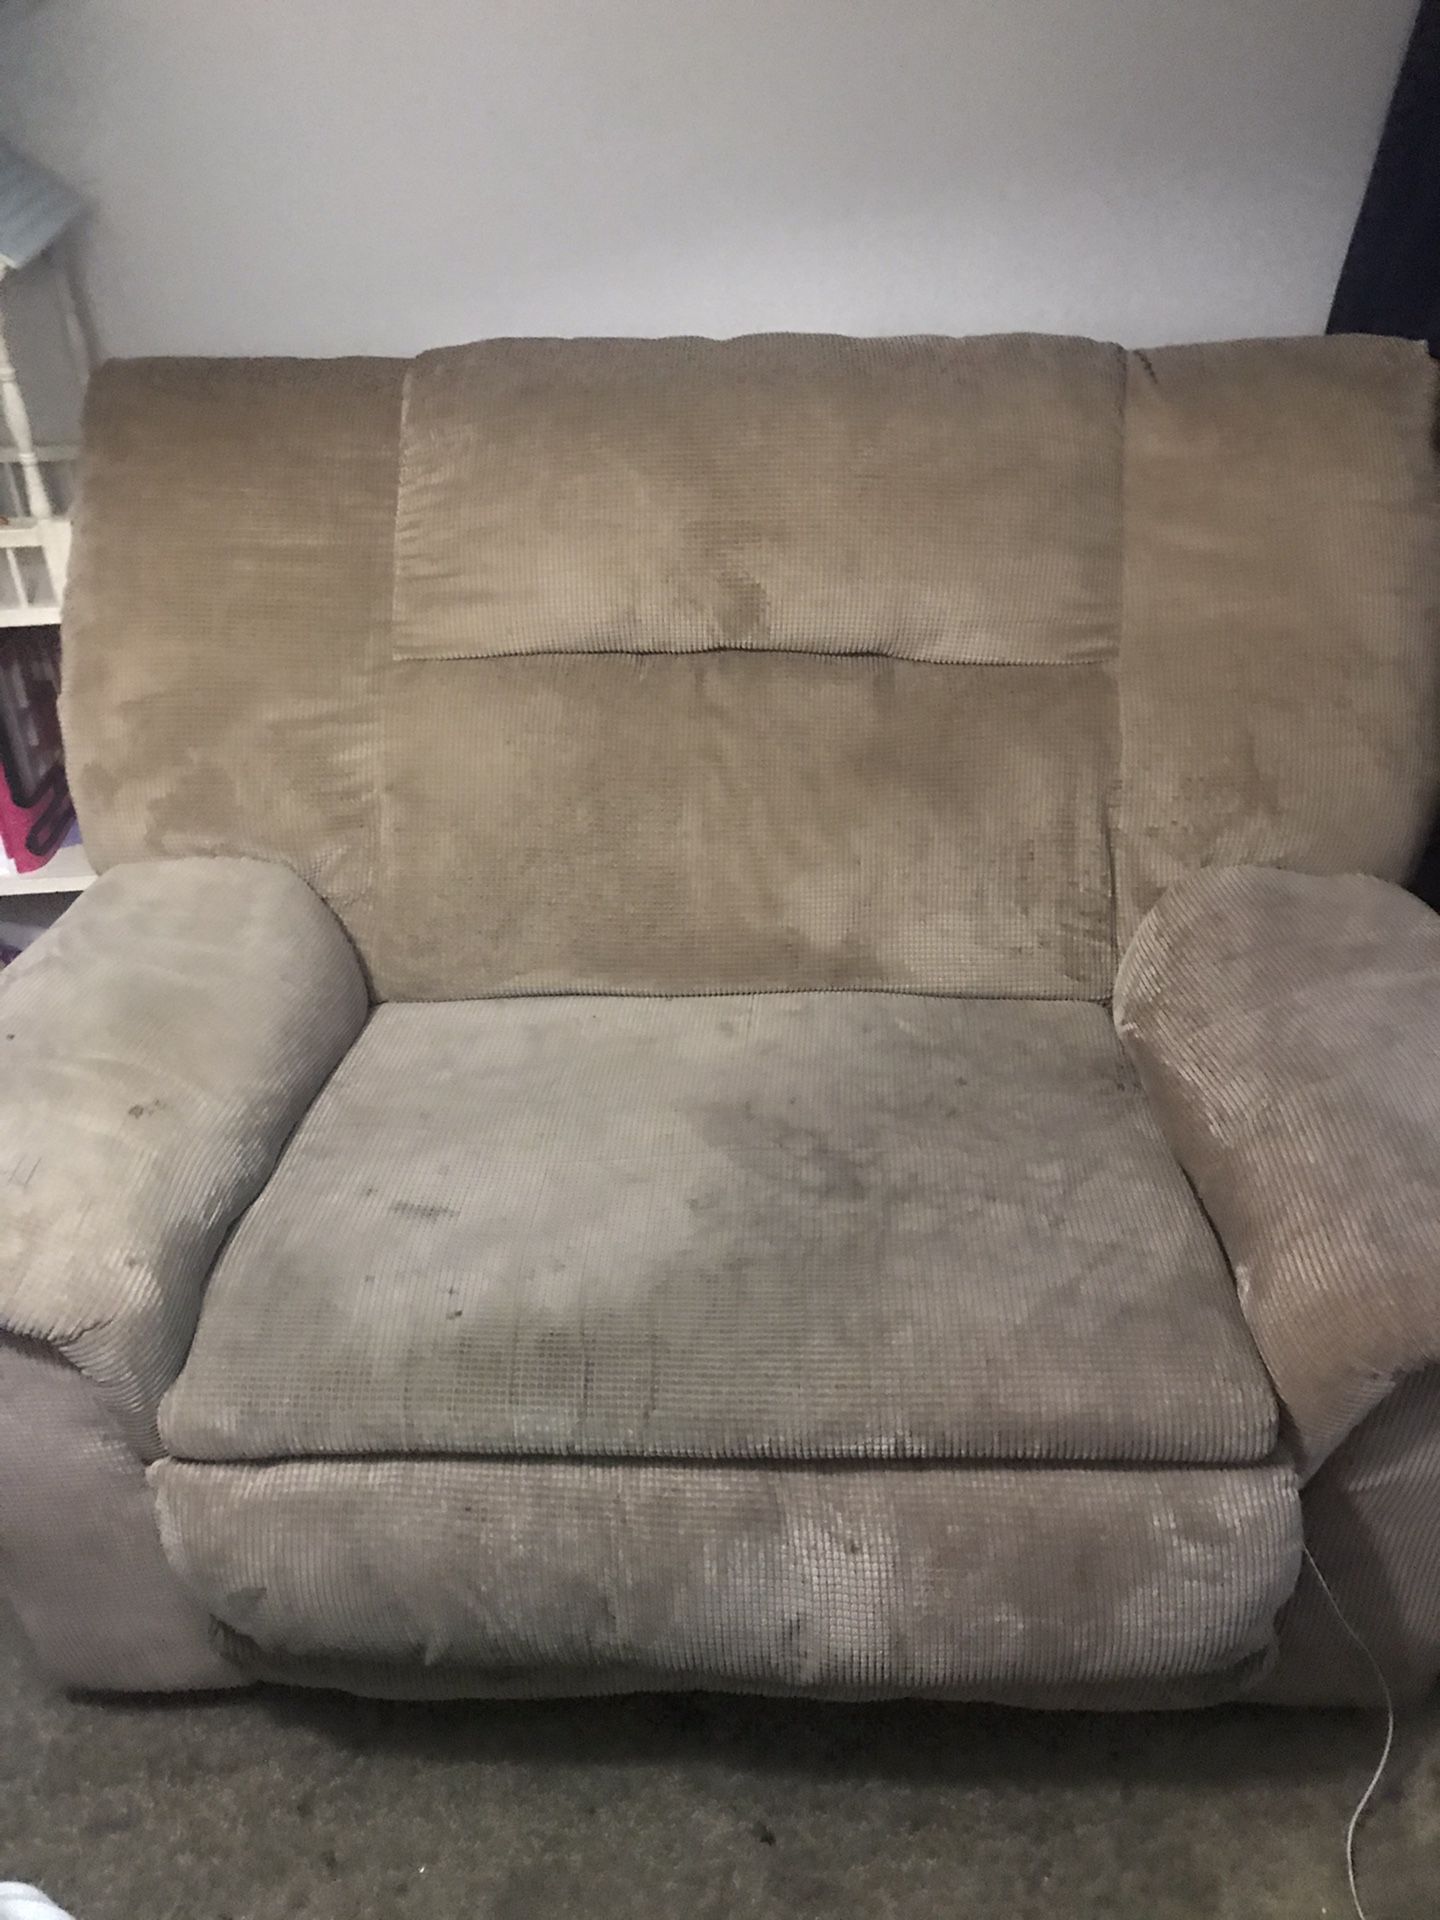 FREE XTRA WIDE RECLINER